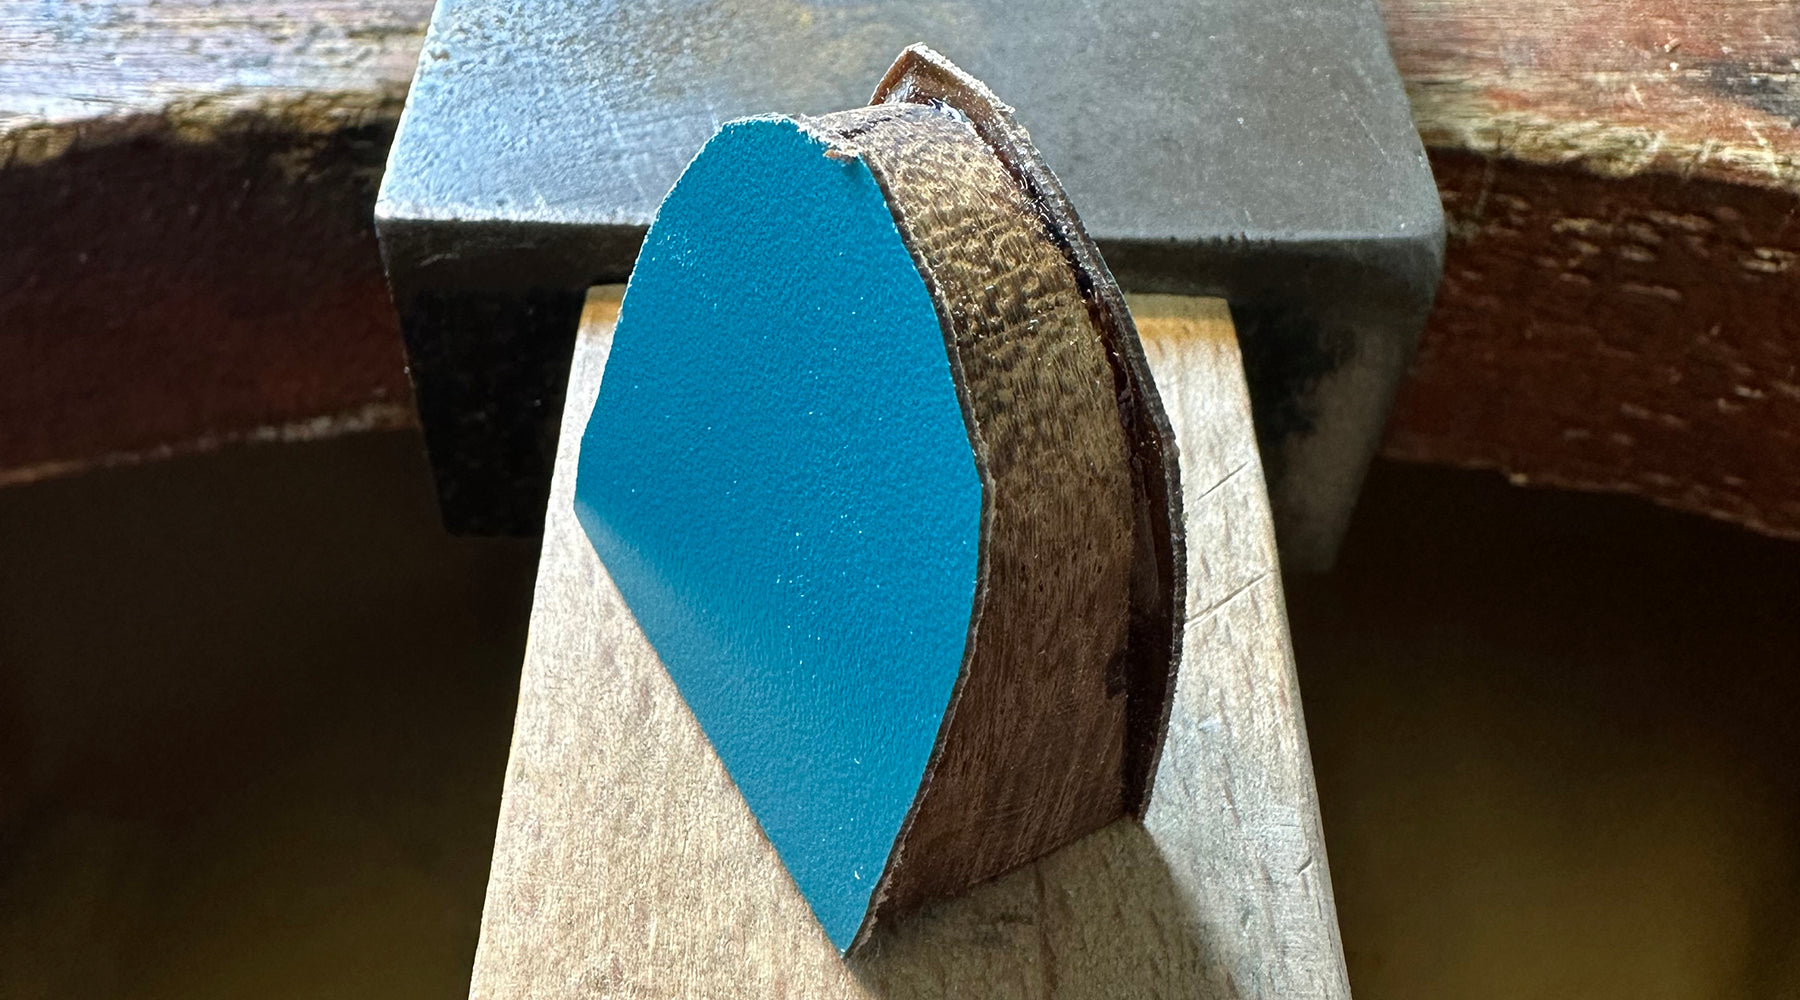 Turquoise laminate glued to the ring